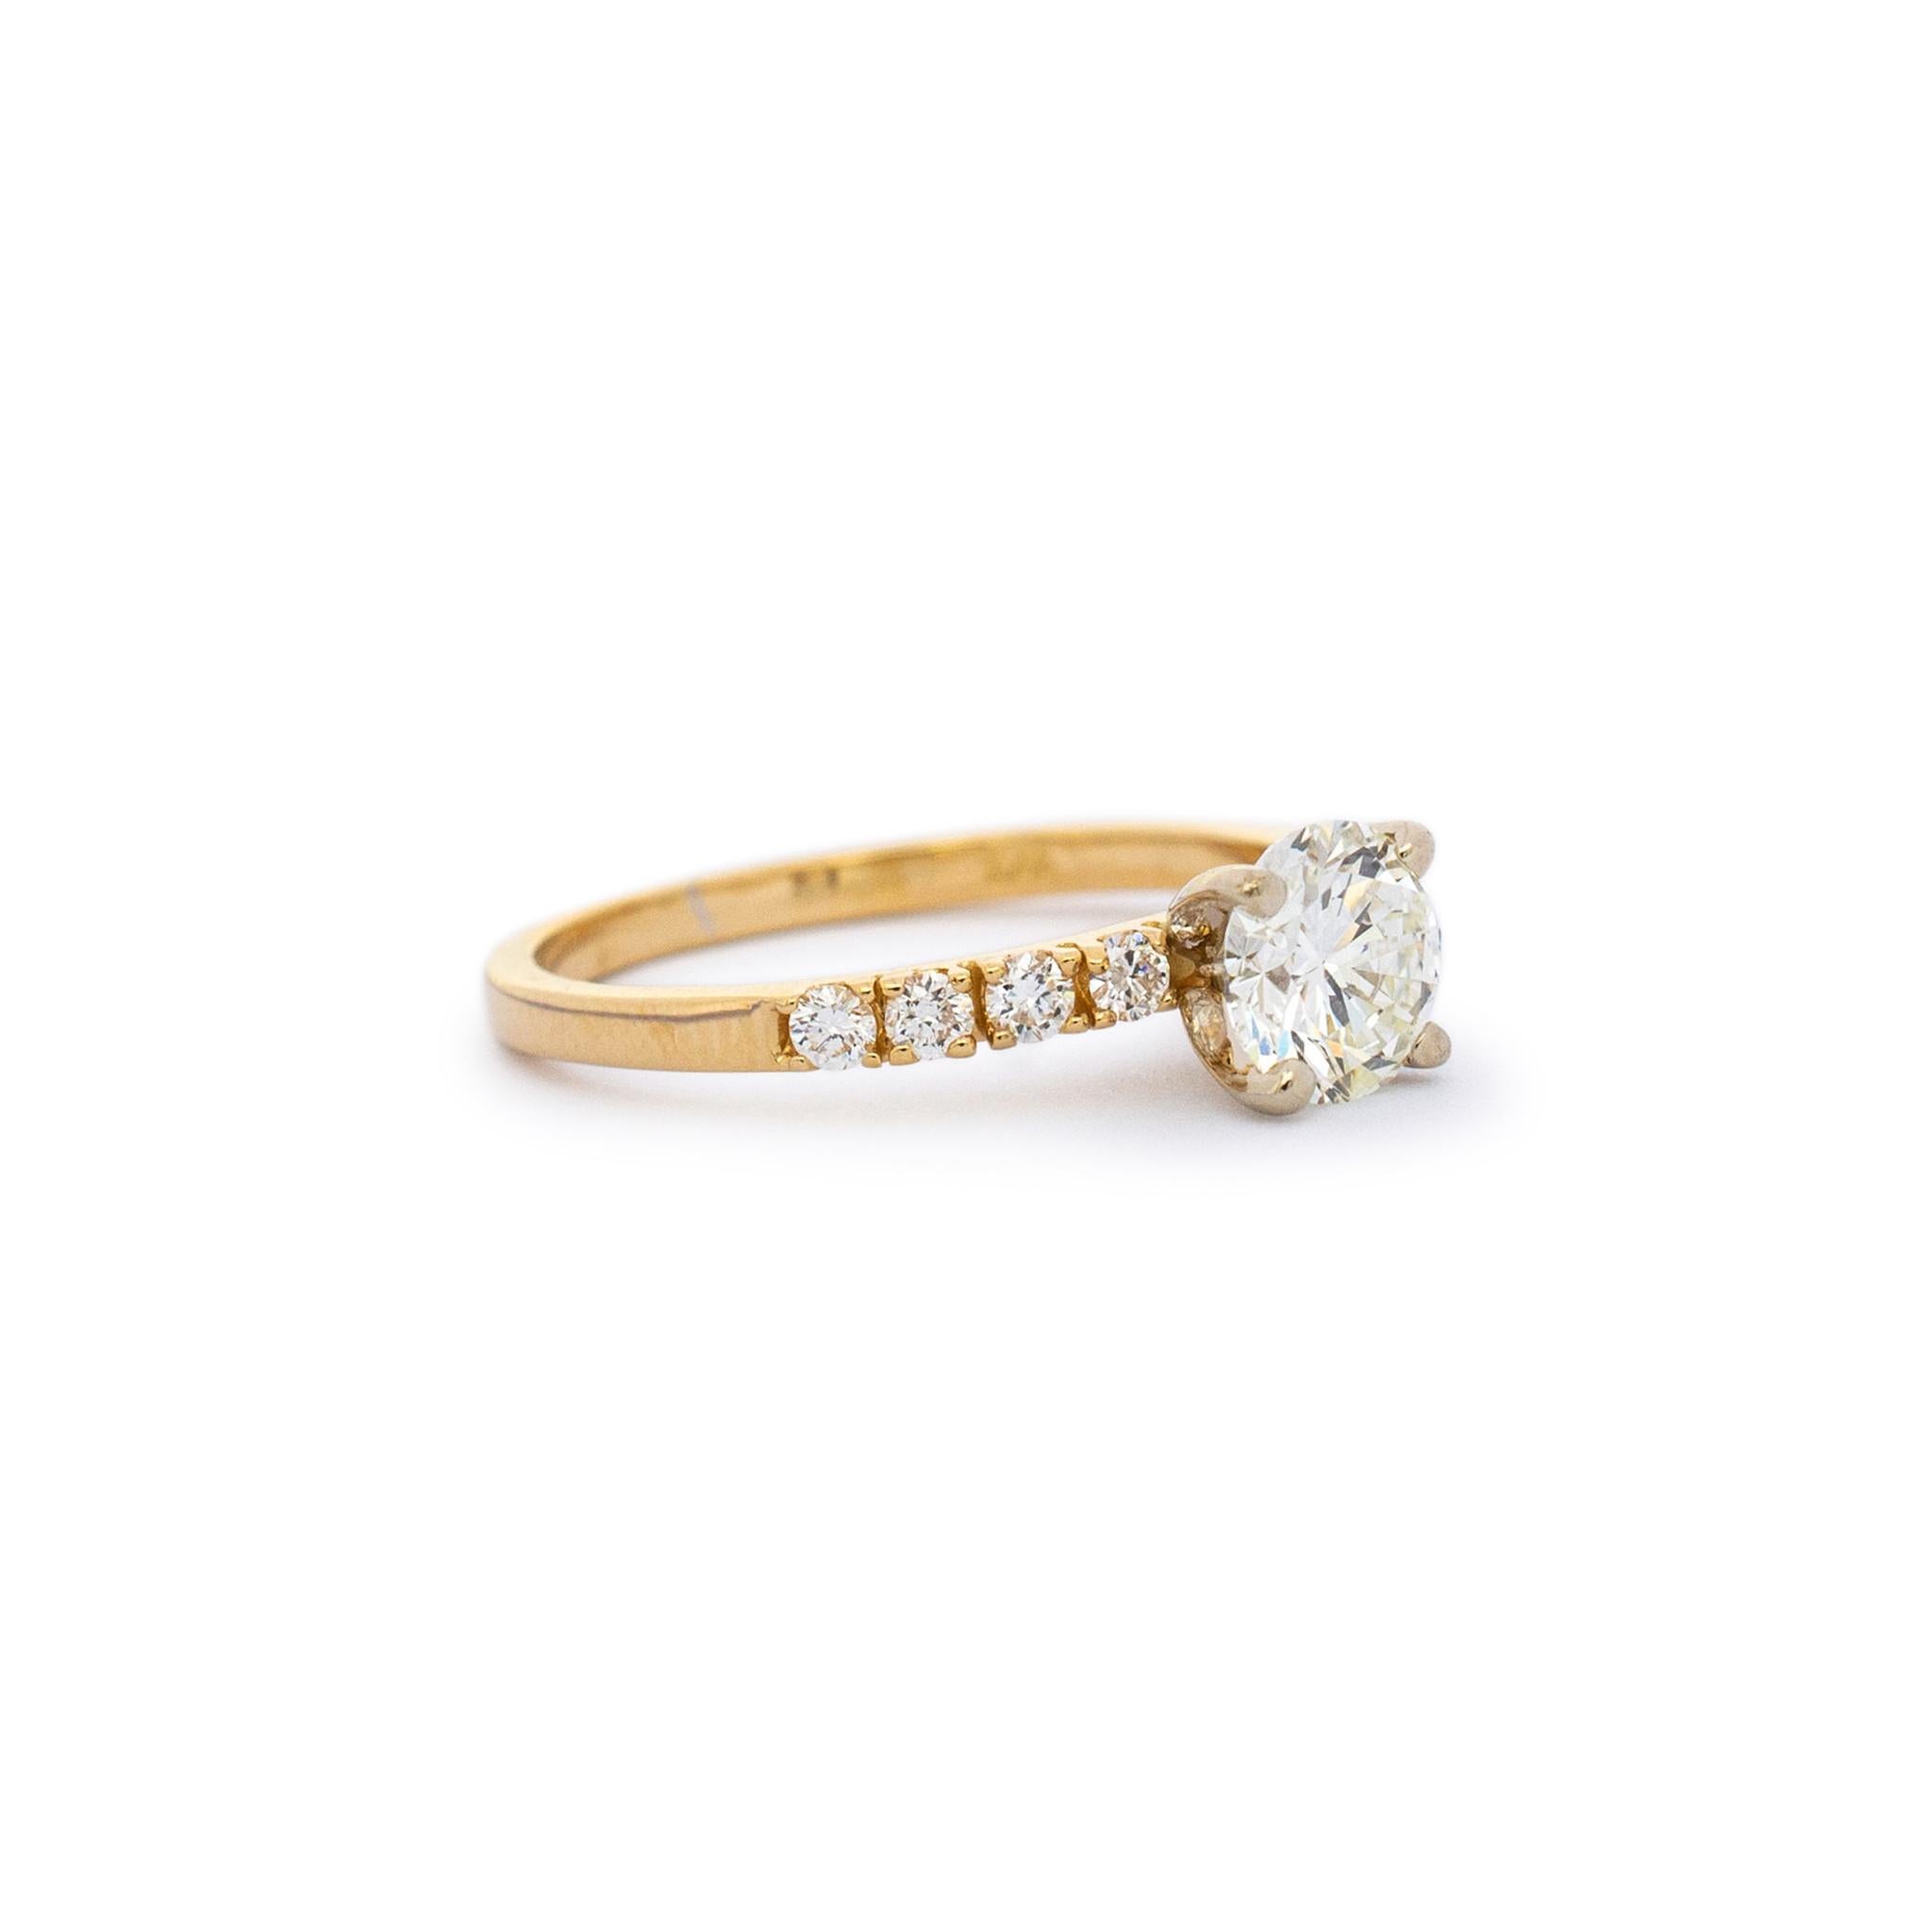 Ladies 18K Yellow Gold Diamond Solitaire Engagement Ring In Excellent Condition For Sale In Houston, TX